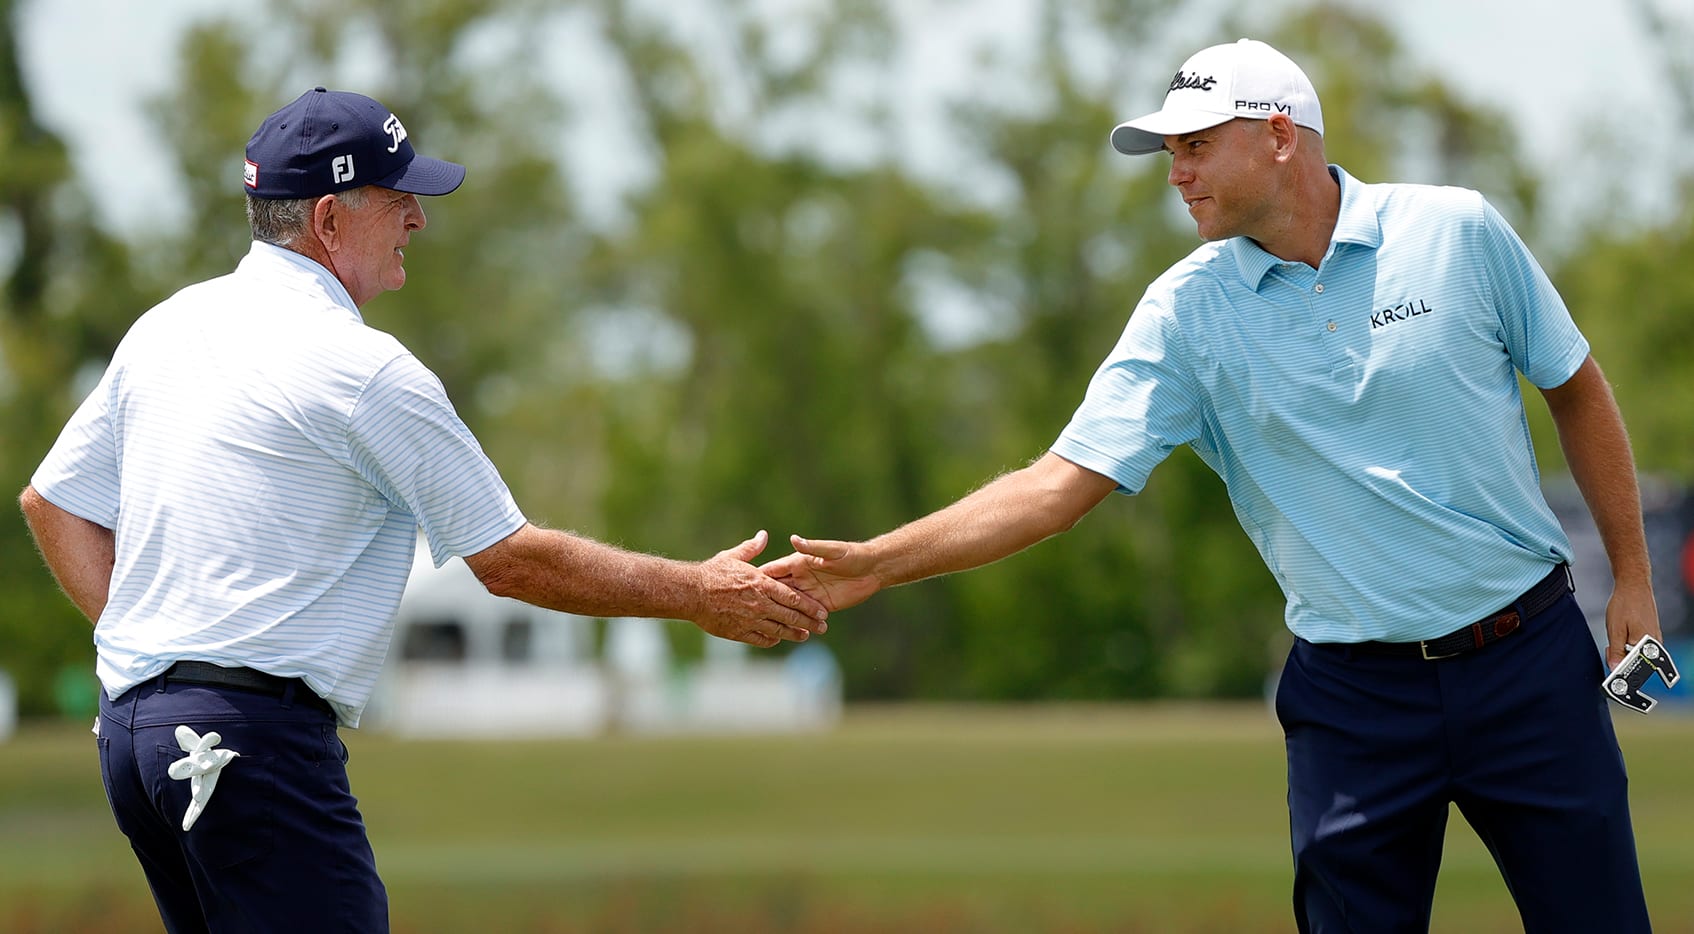 Jay Haas breaks Sam Snead's record as oldest to make cut on PGA TOUR